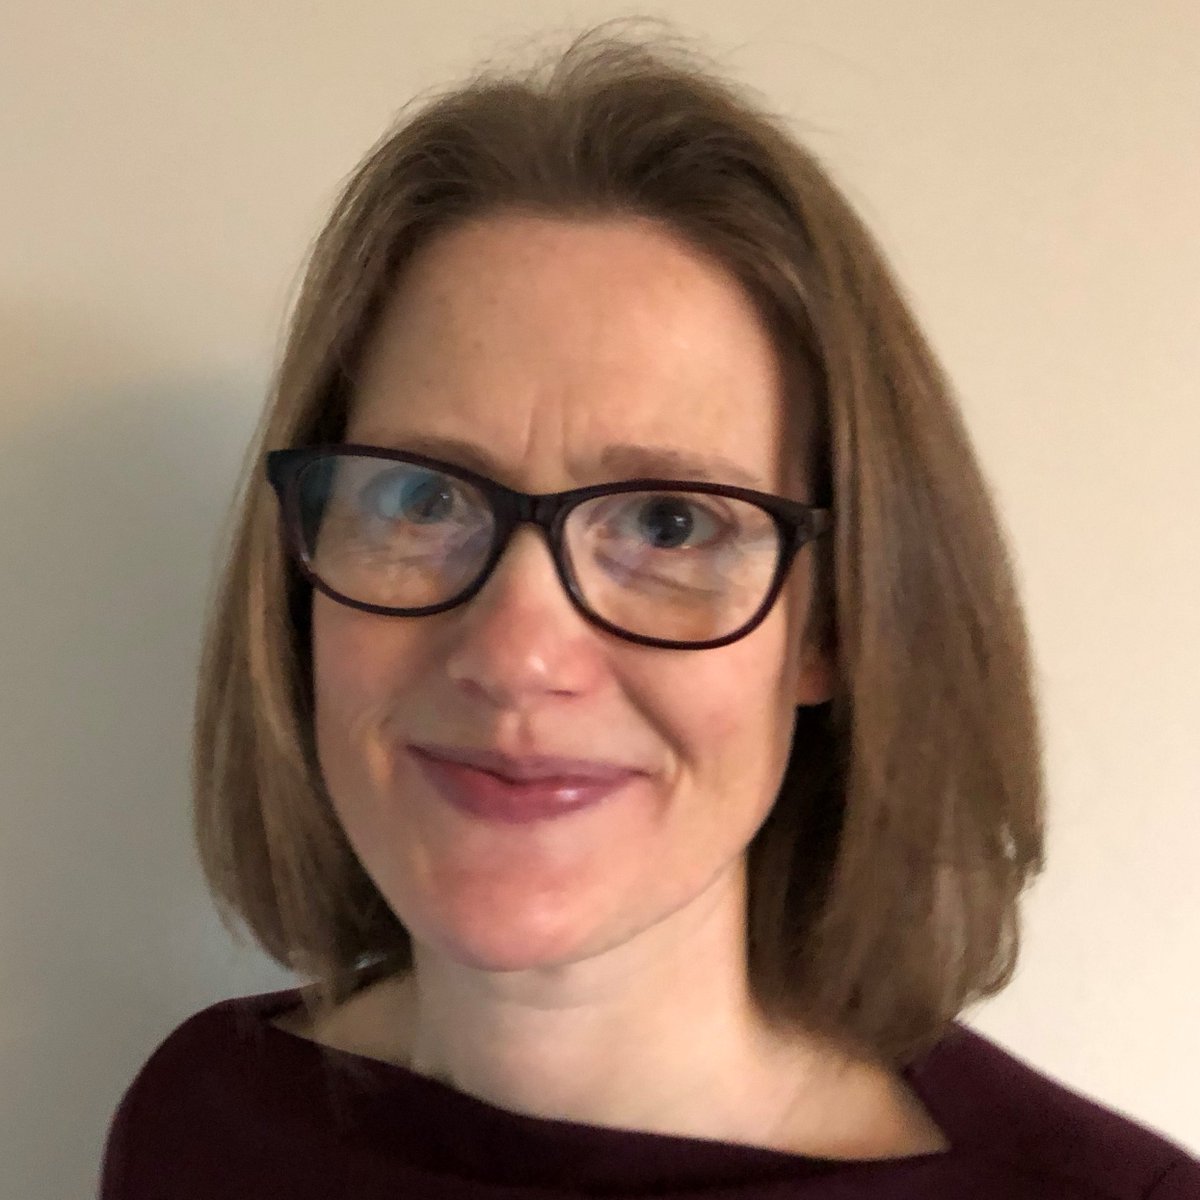 Delighted to announce Emilie Wilkes is our new Deputy Divisional Director. NUH gastro consultant and co-chair of the SDEC programme group, Emilie loves innovation and exciting challenges. Say hello if you see her out and about!